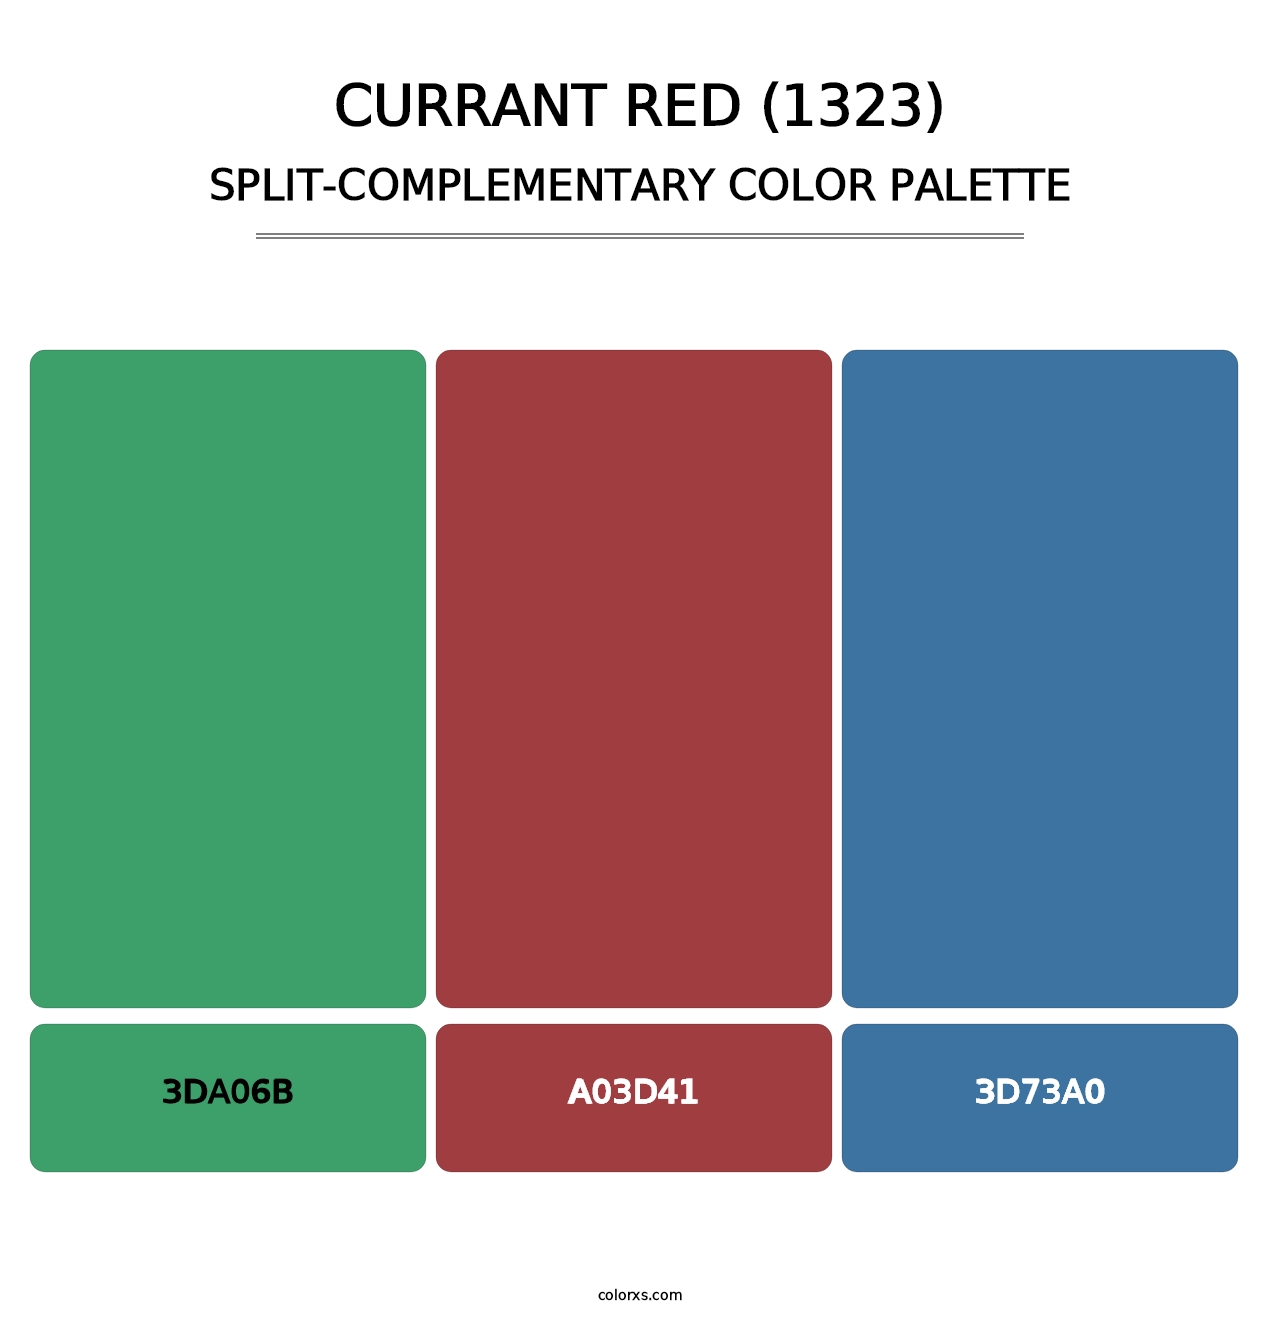 Currant Red (1323) - Split-Complementary Color Palette